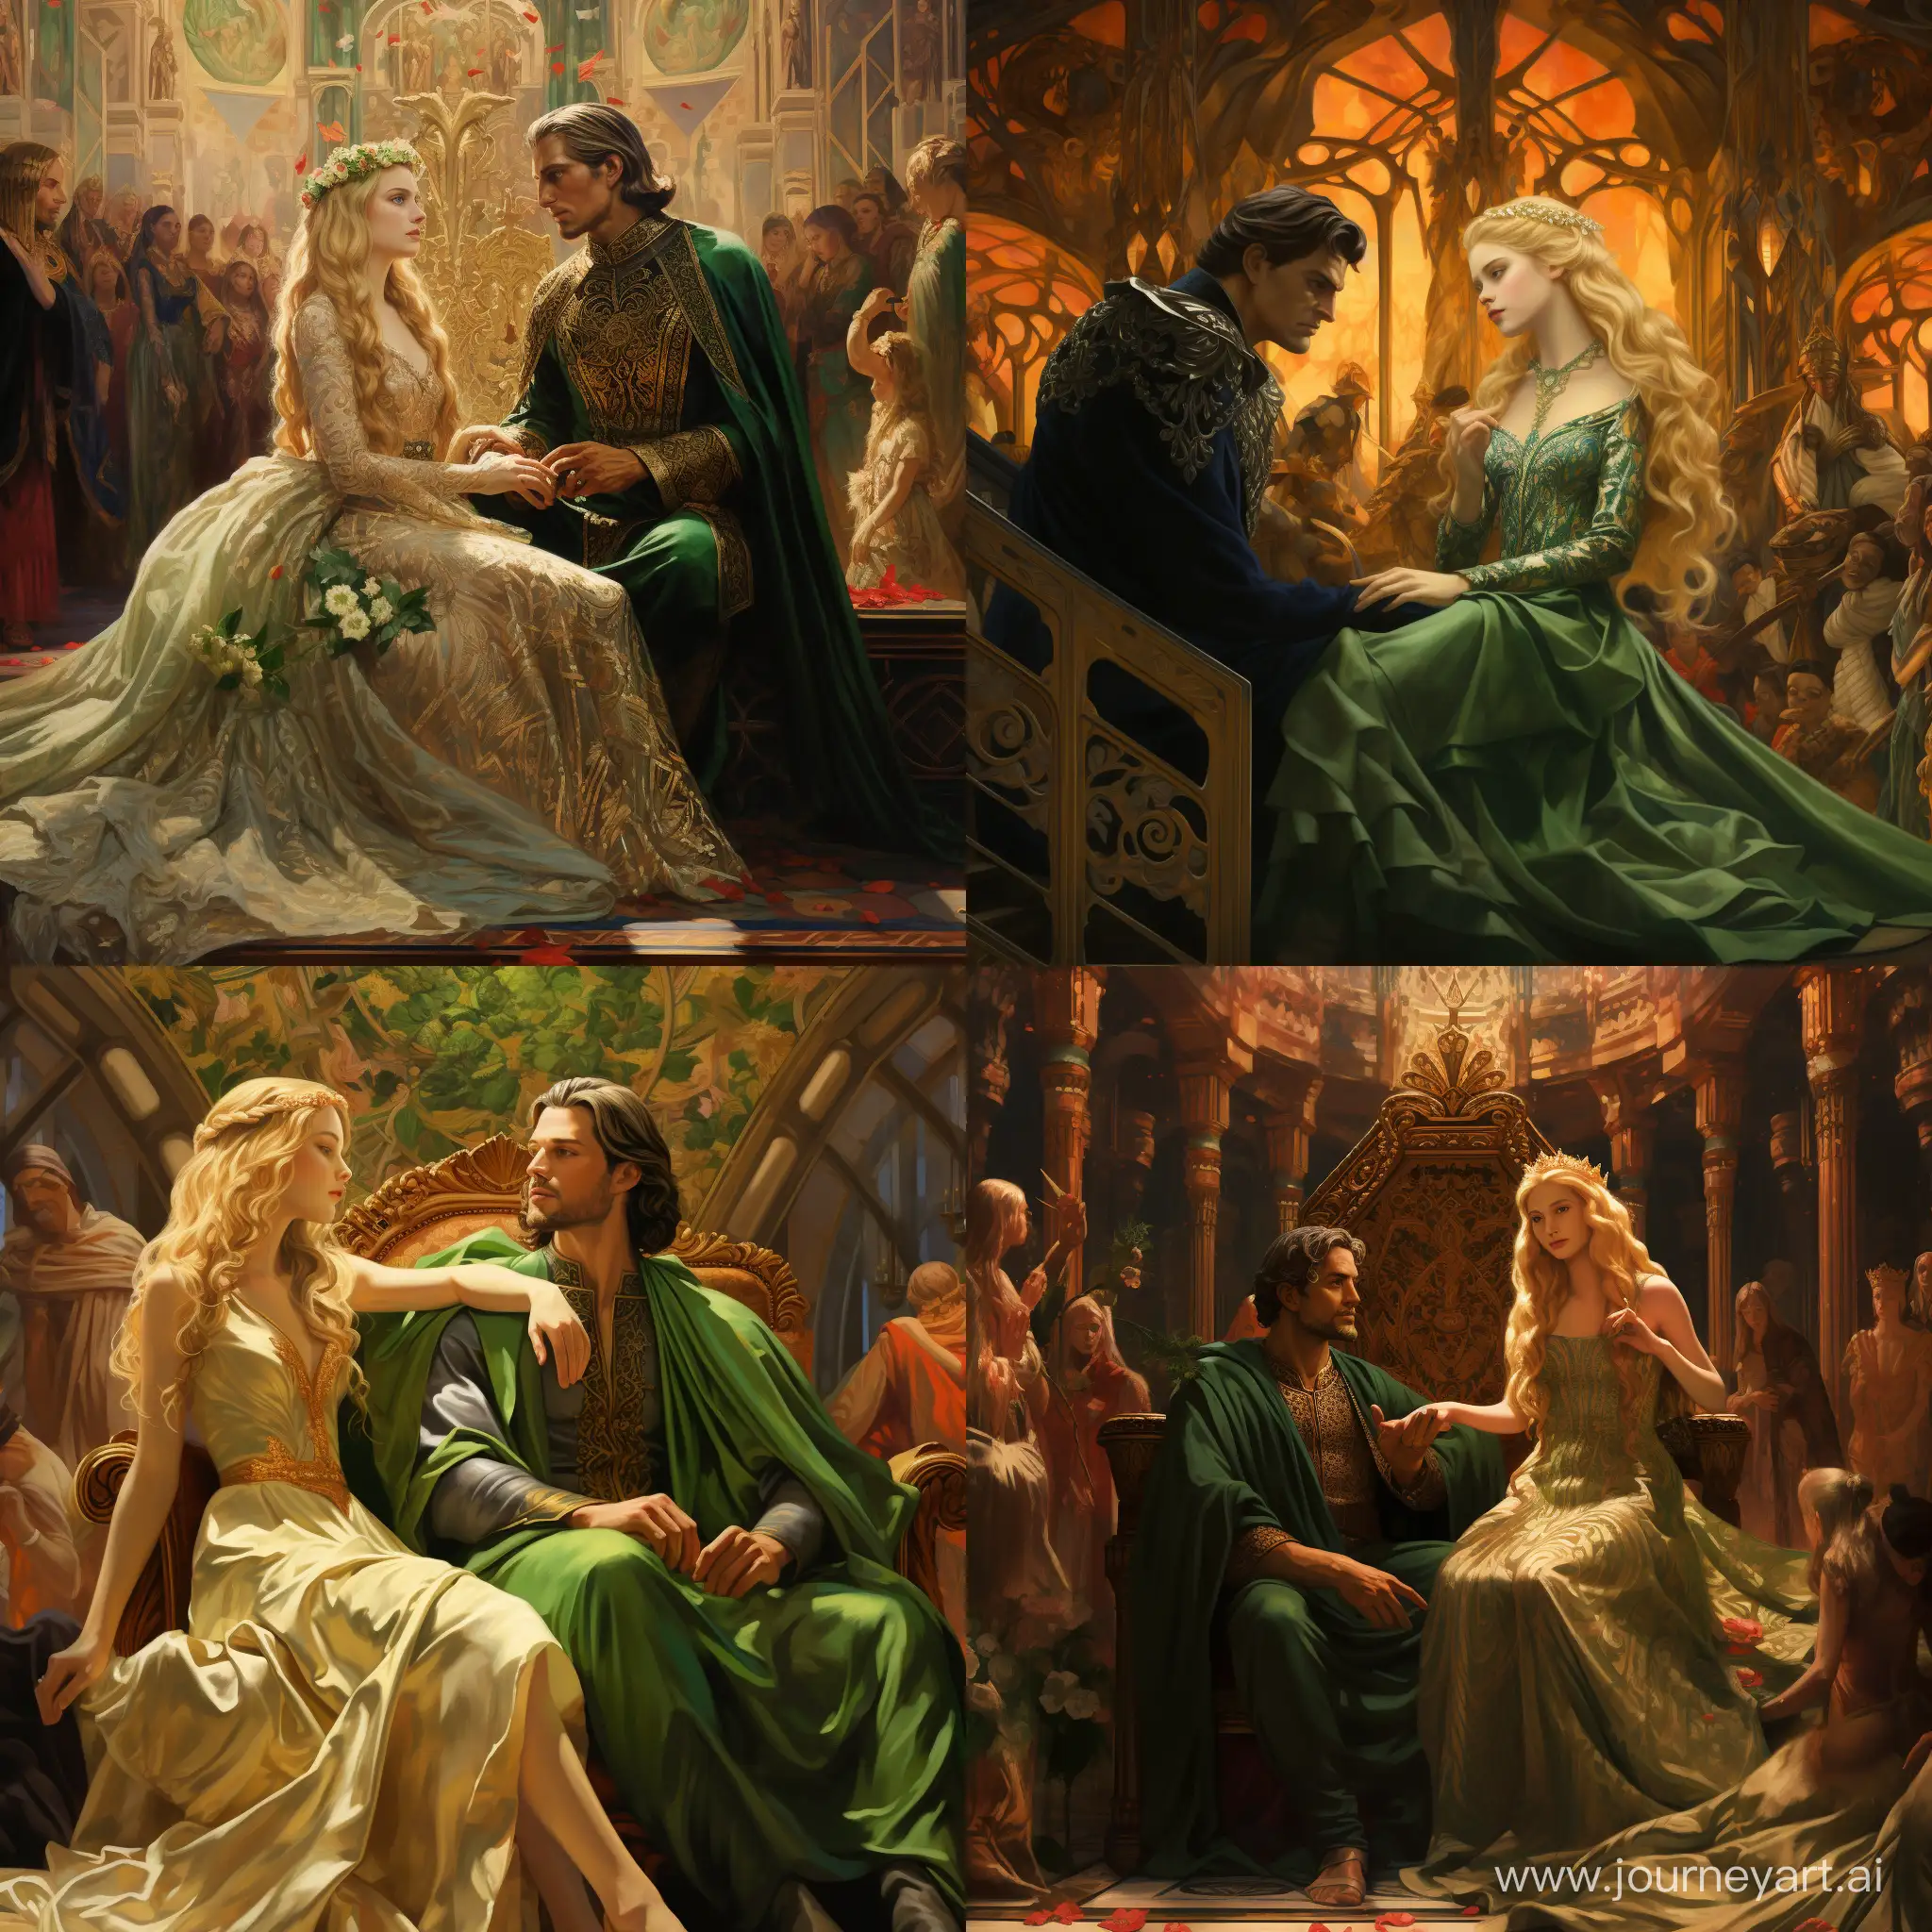 Royal-Emperor-on-Throne-with-Blonde-Girl-in-Green-Dress-in-Festive-Throne-Room